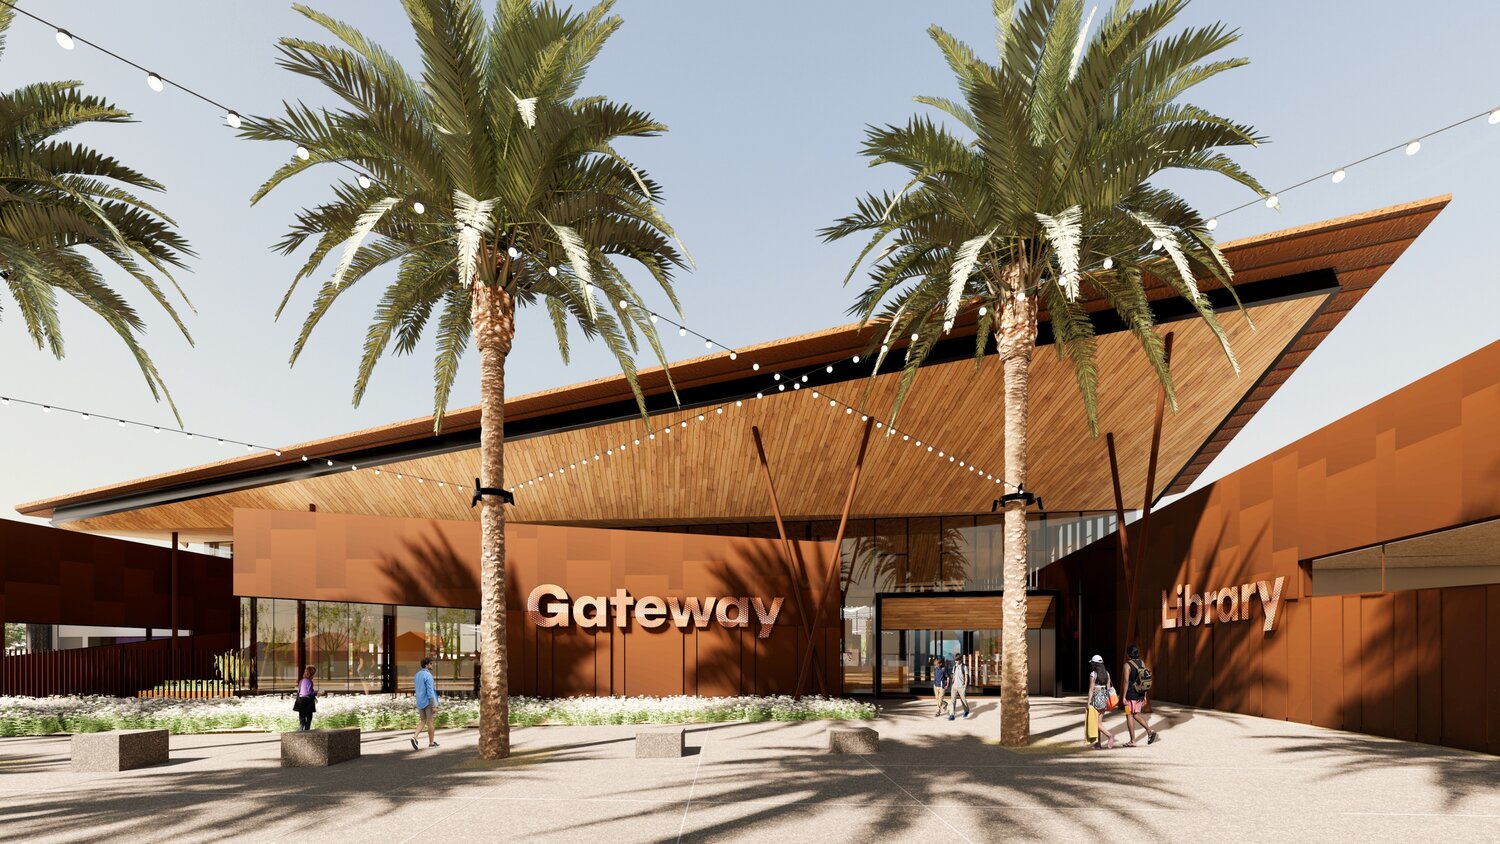 The state-of-the-art facility will be Mesa’s first new full-service library in more than 25 years